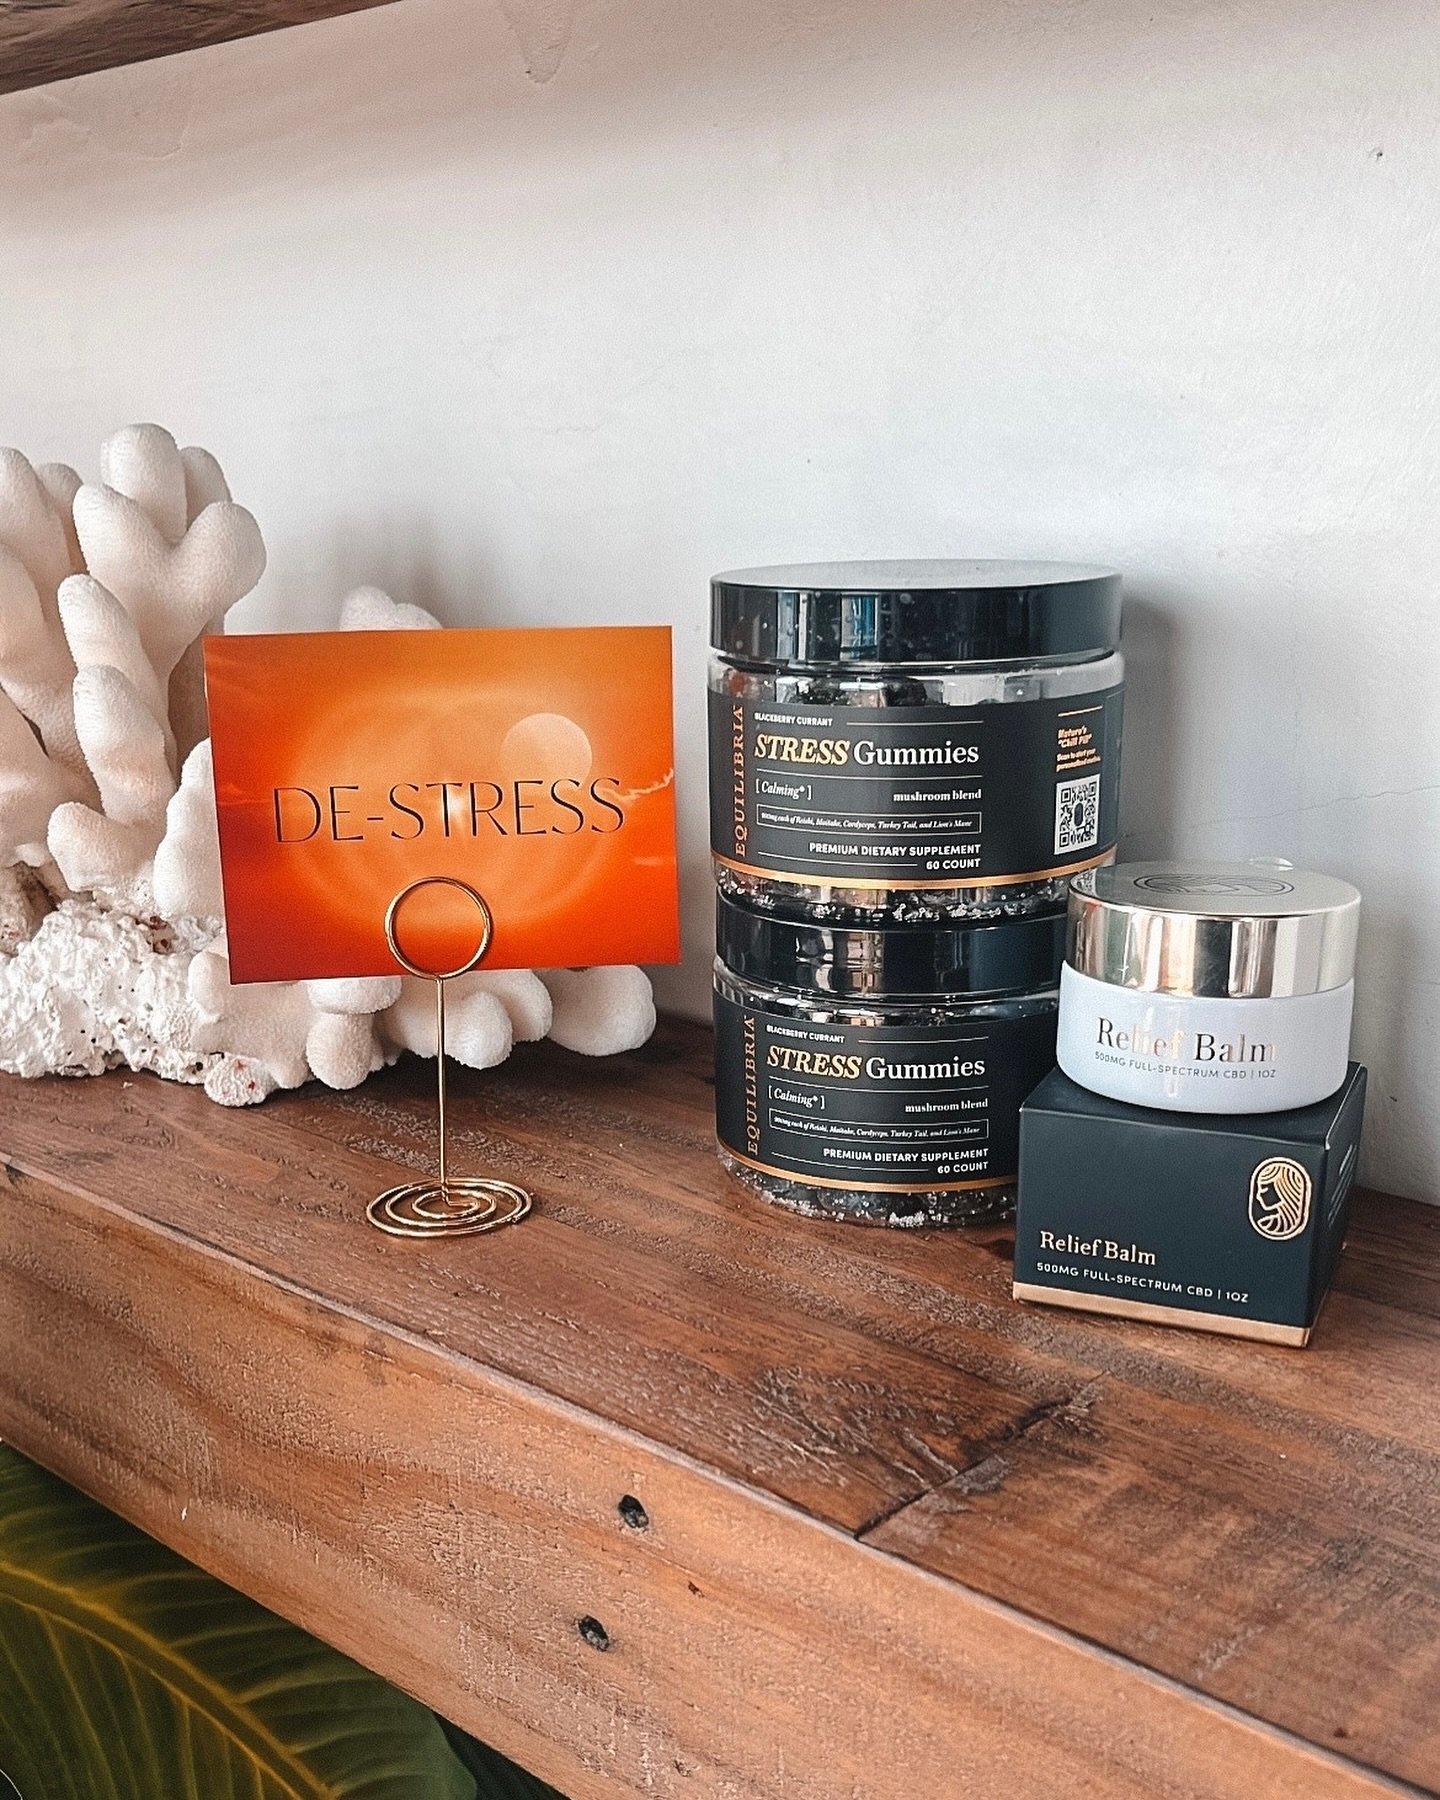 Amid the hustle + bustle of everyday life, finding moments to unwind is essential. This Stress Awareness Month, take a pause + prioritize your peace of mind.

Our infrared saunas provide a serene escape, while our Stress Gummies, Relief Balm + other 